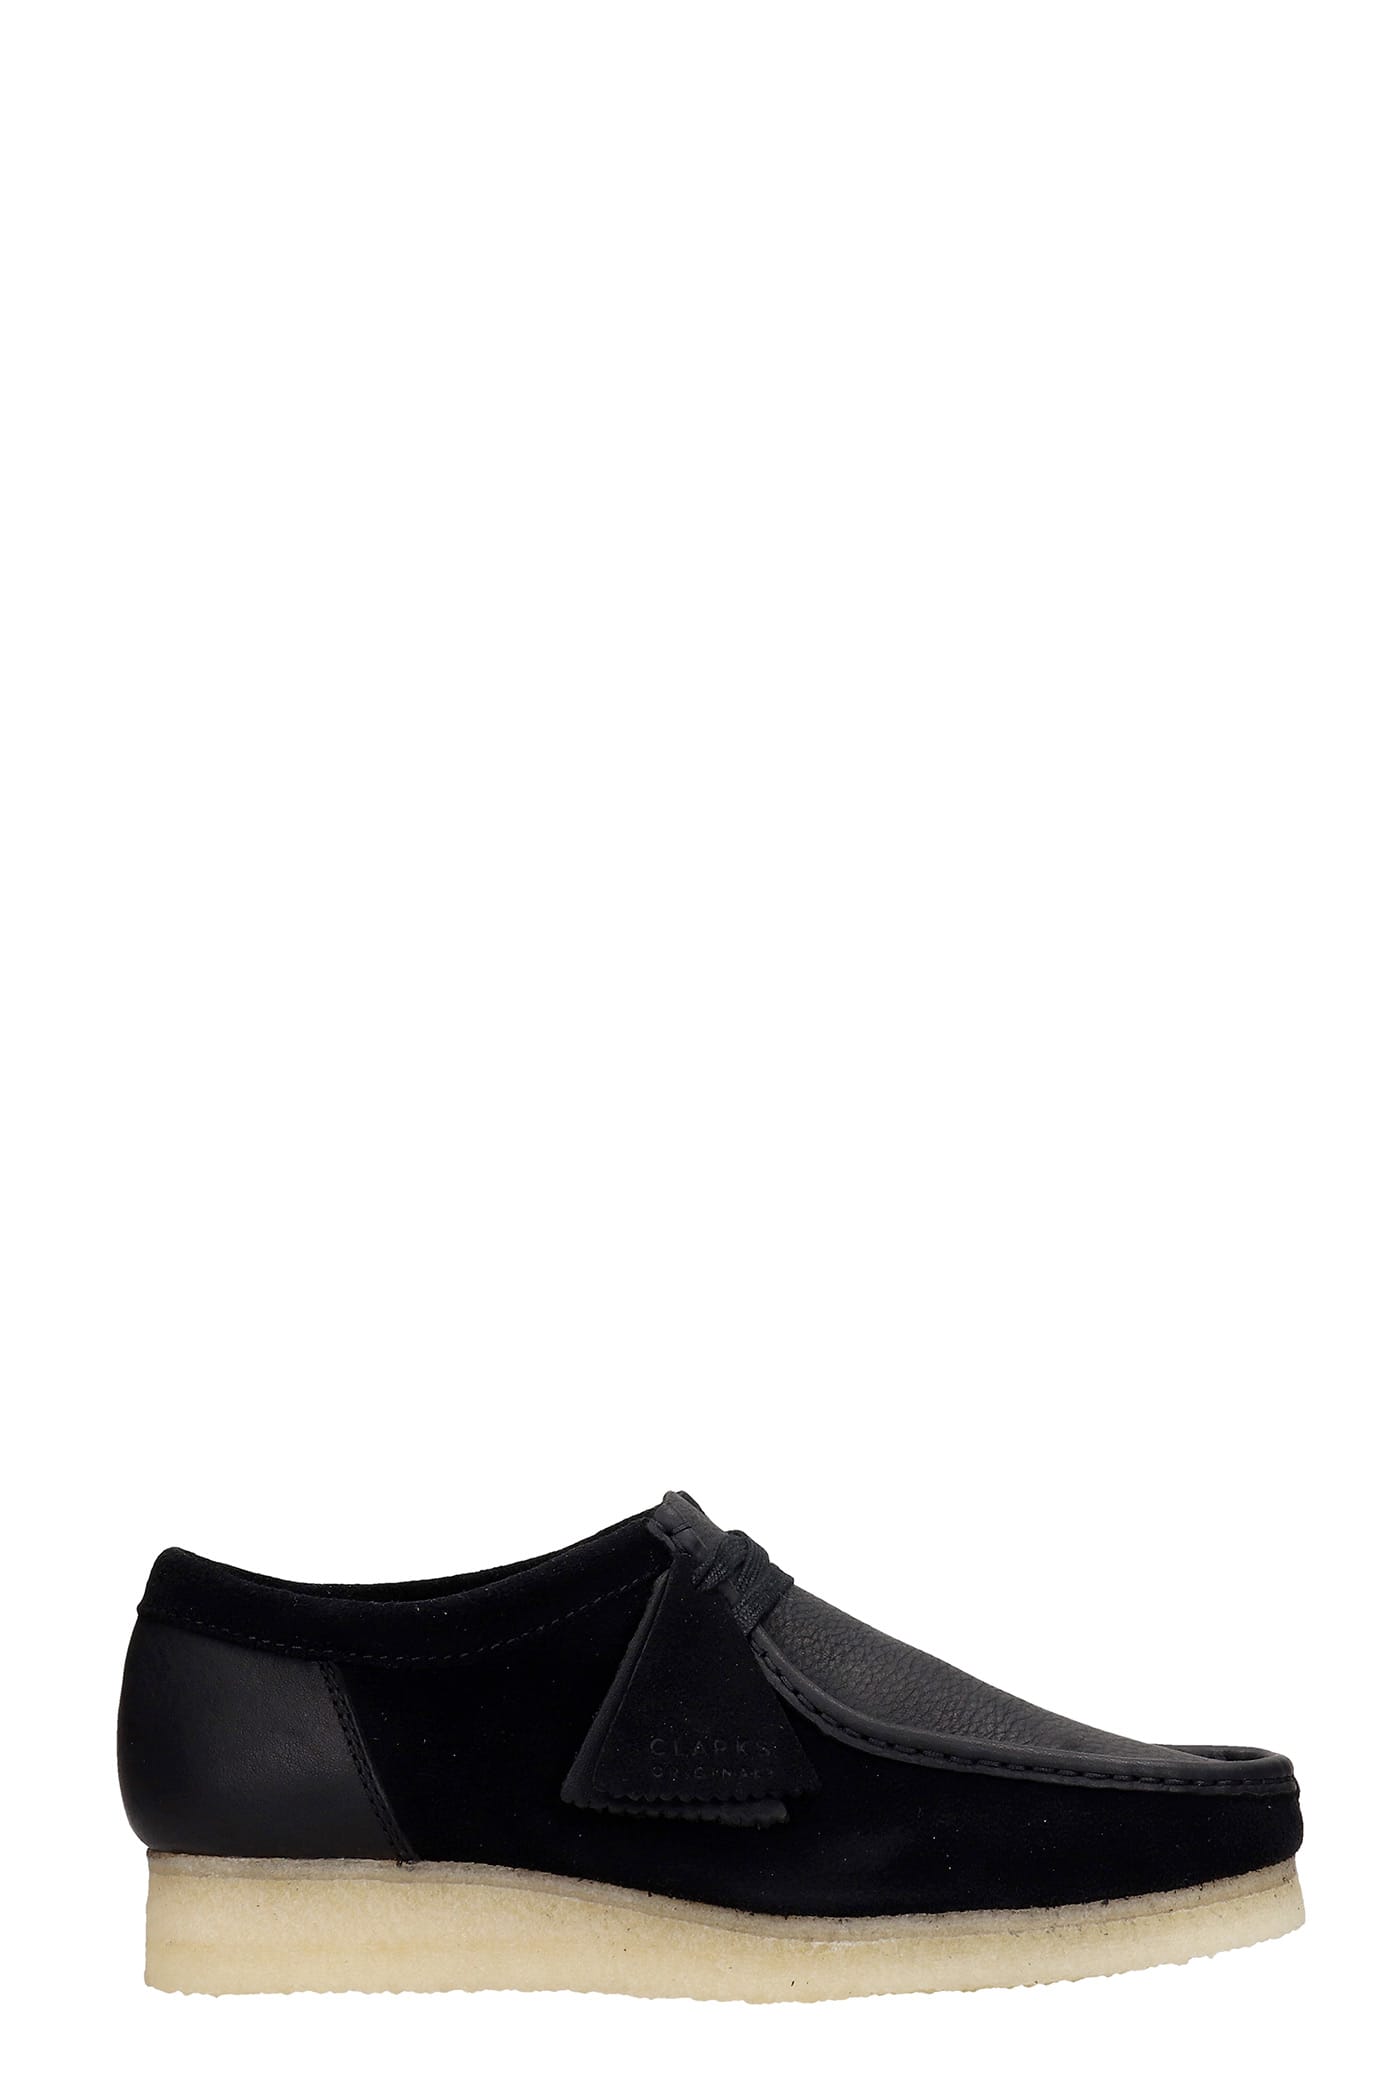 Clarks Wallabee Lace Up Shoes In Black Suede And Leather